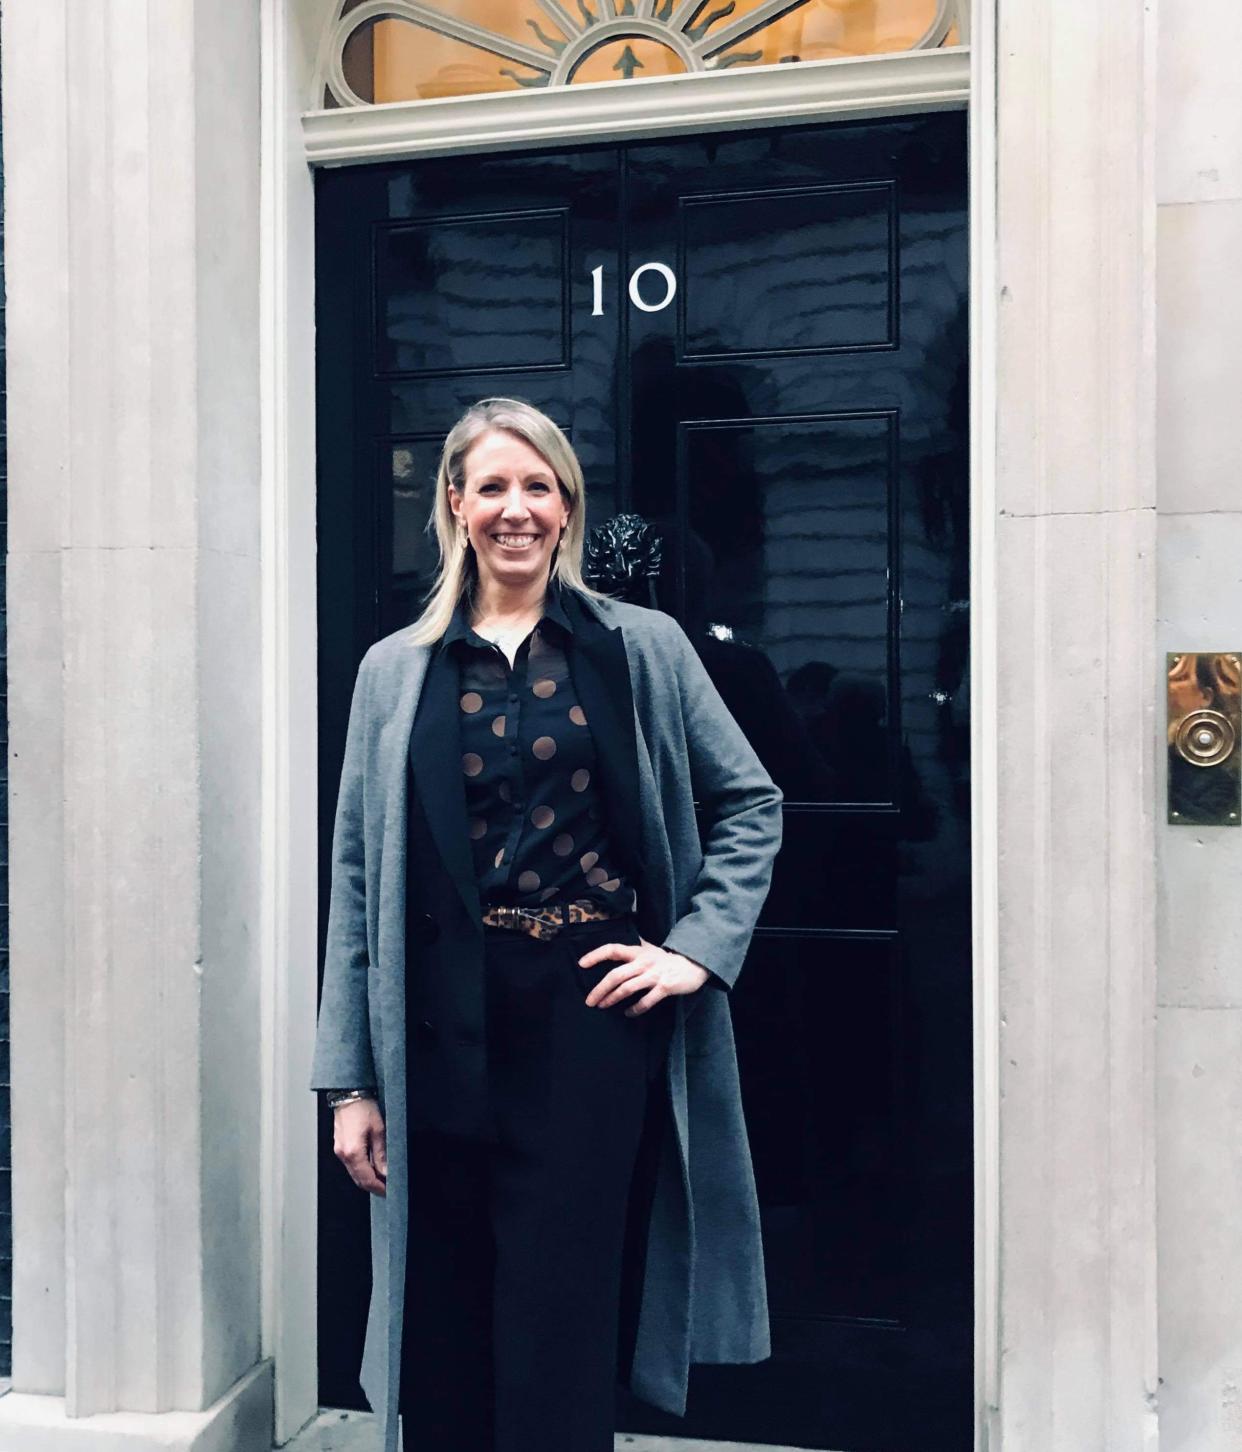 Anna Price at 10 Downing Street, where she met with the small business team, as the founder of Rural Business Group. (Supplied, Anna Price)